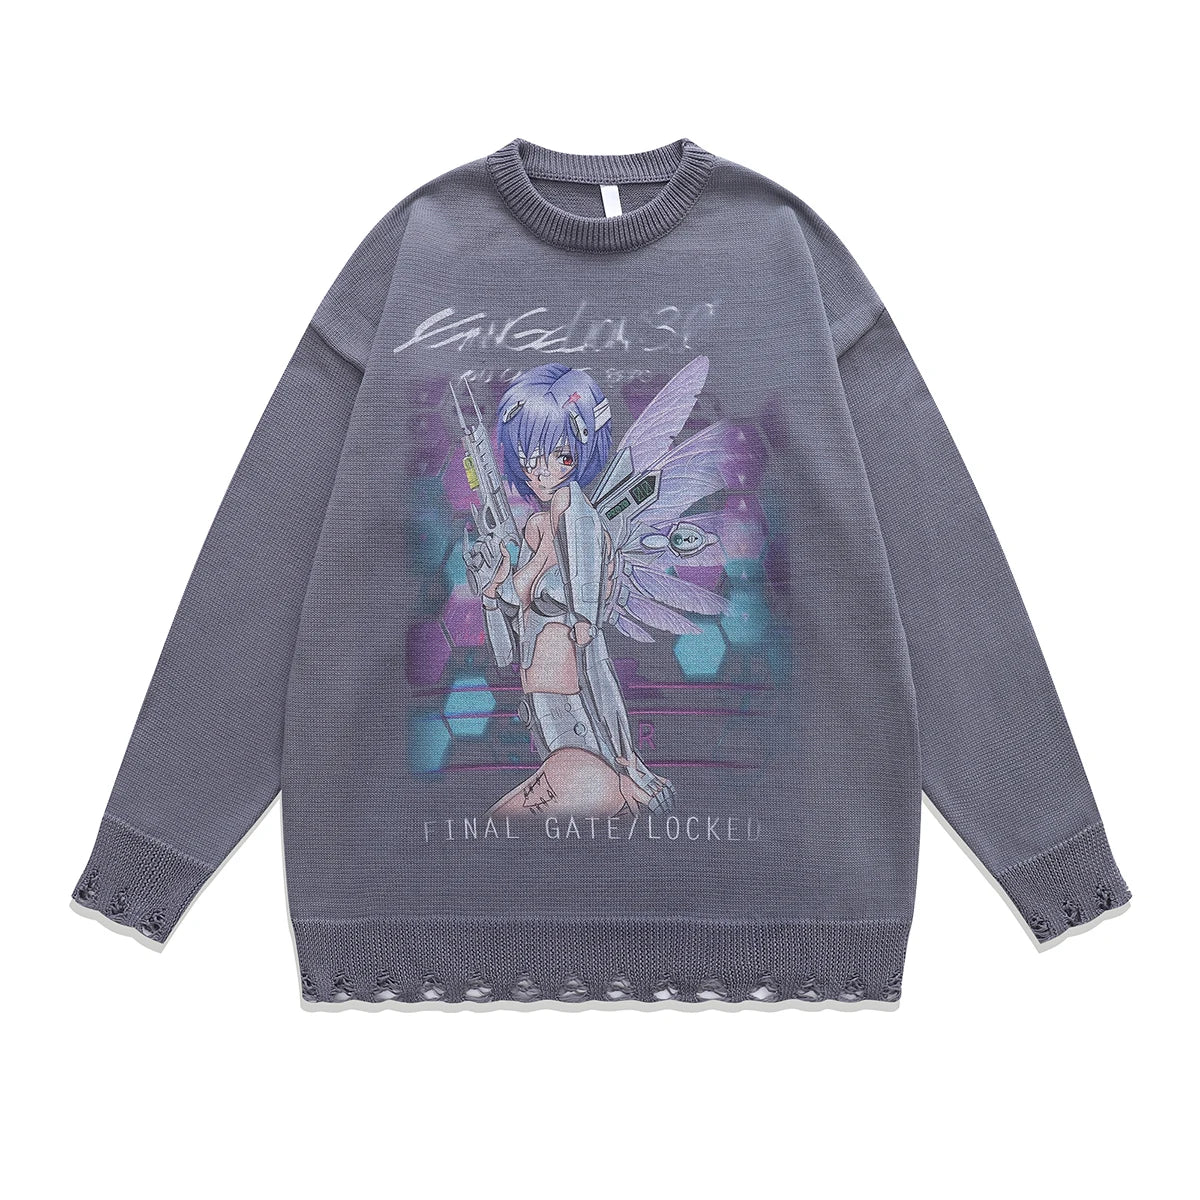 Anime New Jeans Sweater Grey 2